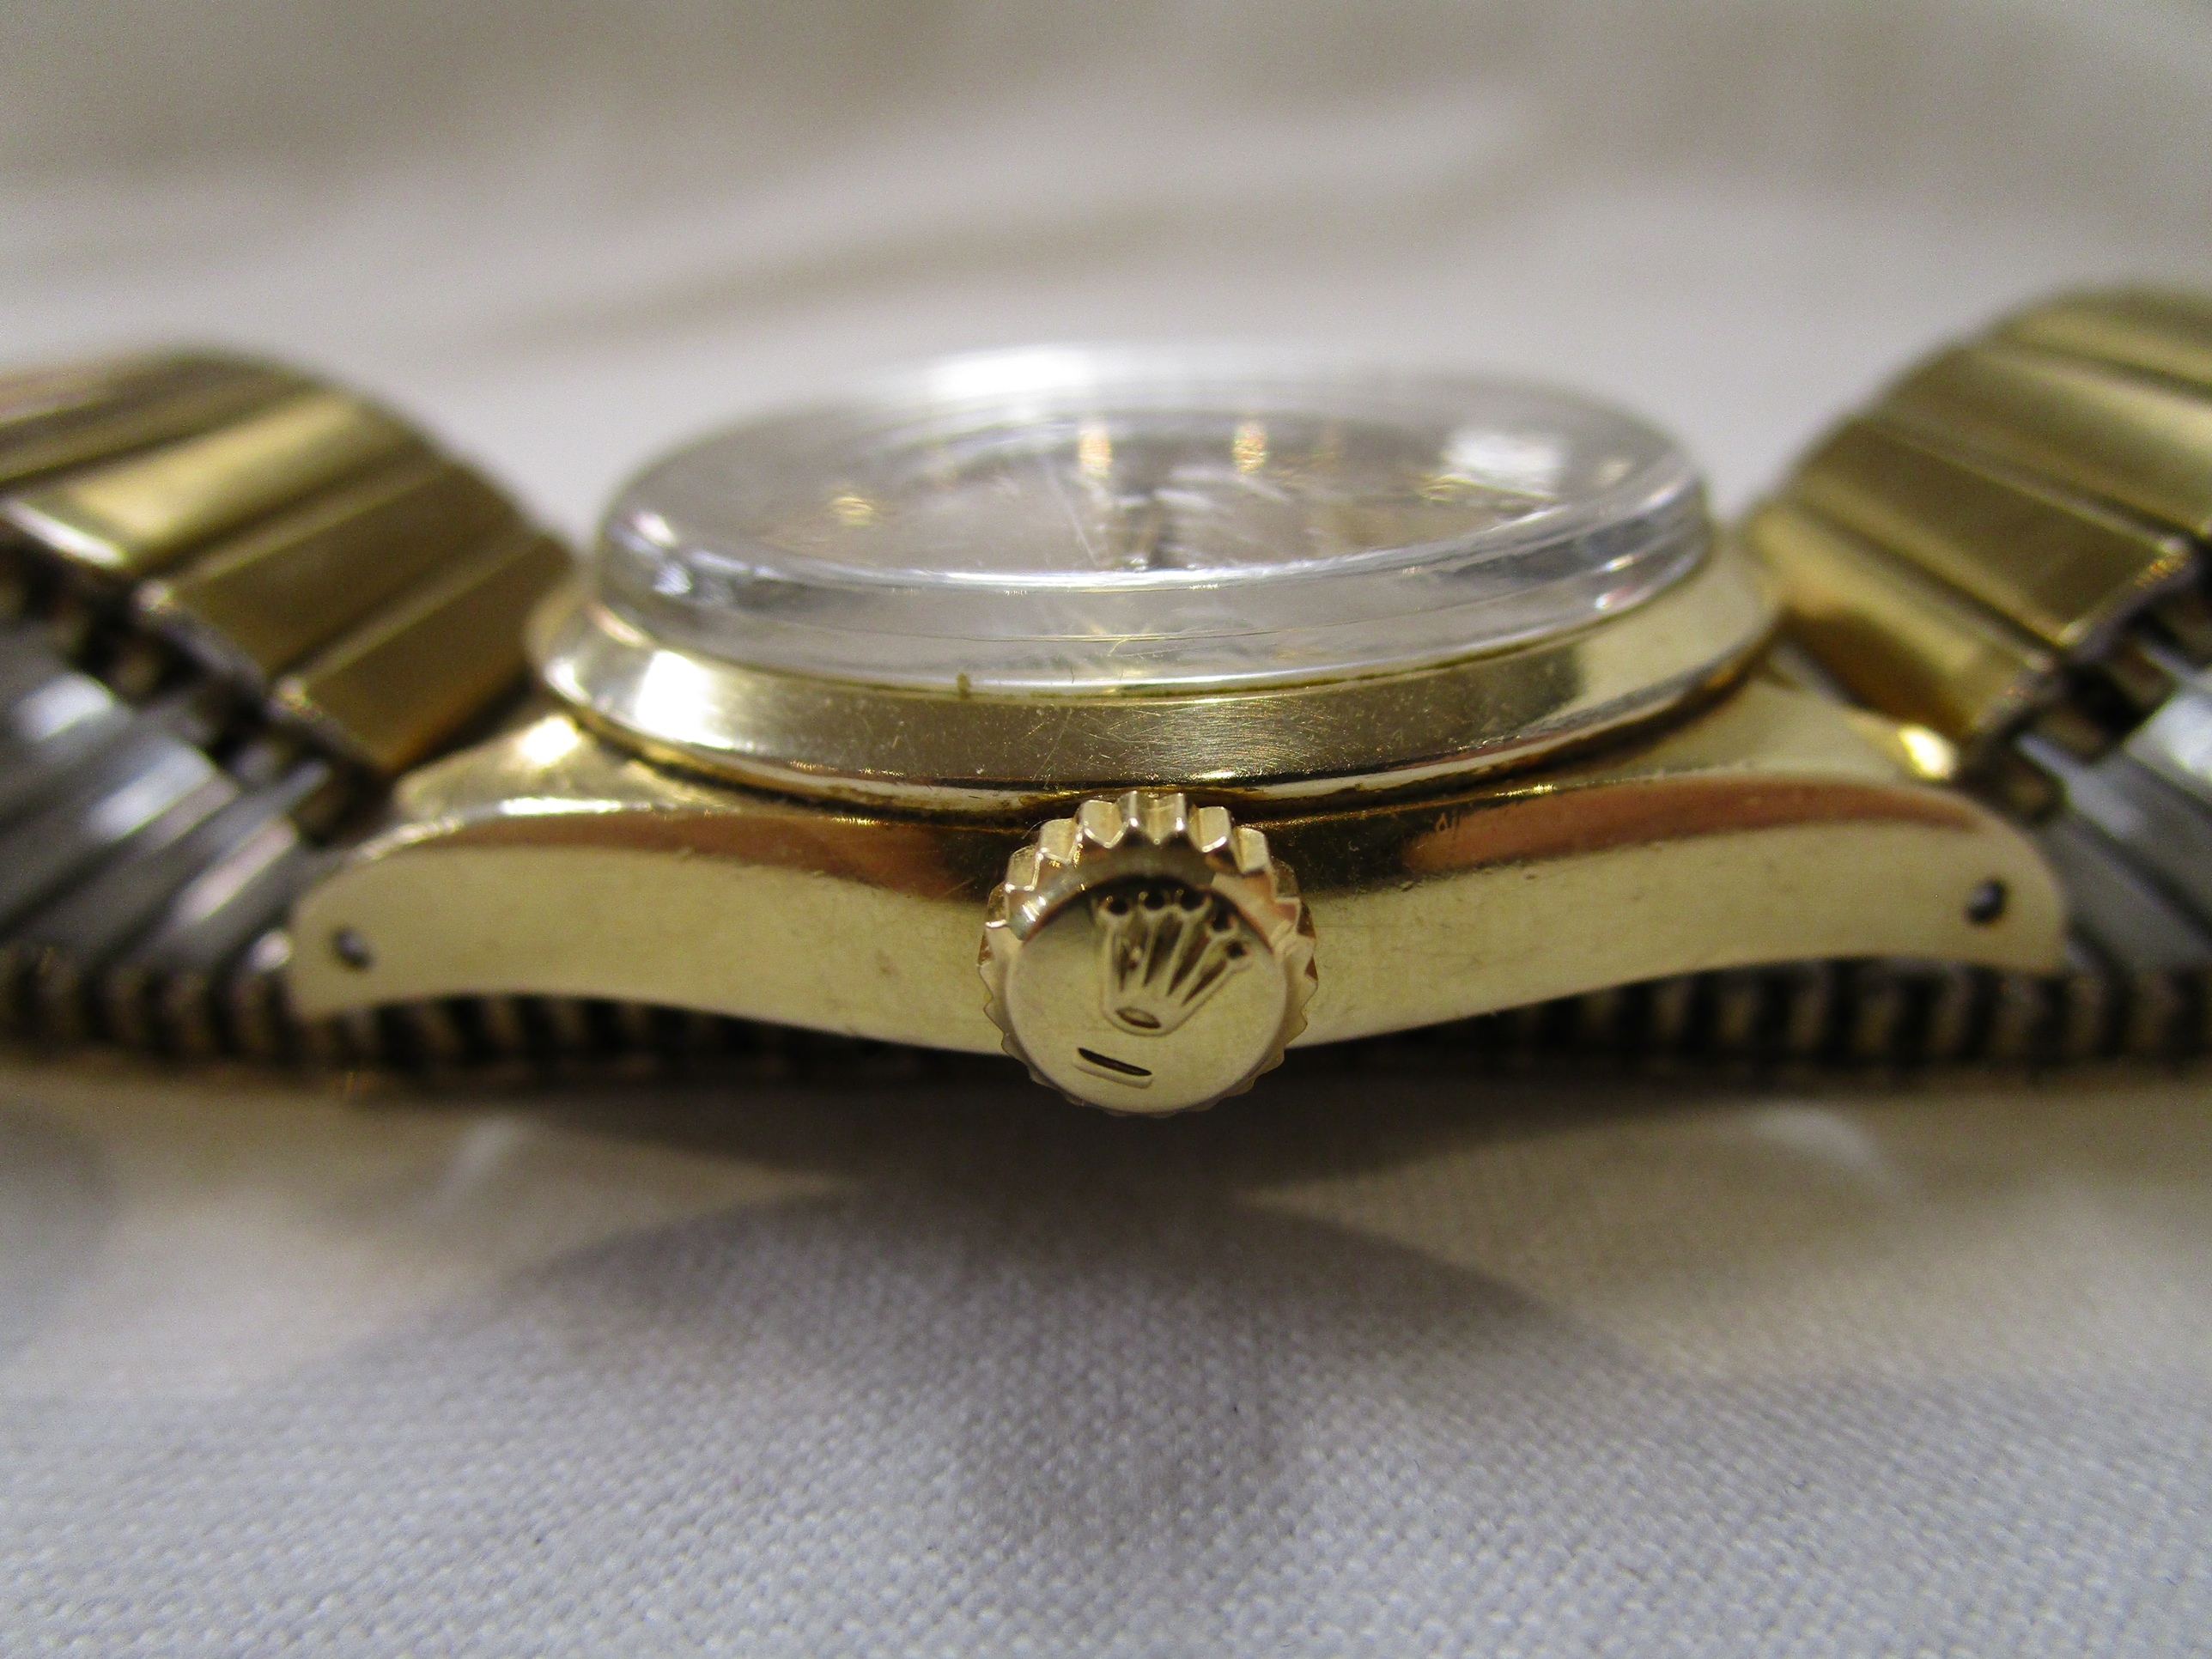 Rolex Oyster Perpetual working gents watch - 1967 model 6634 - Image 3 of 12